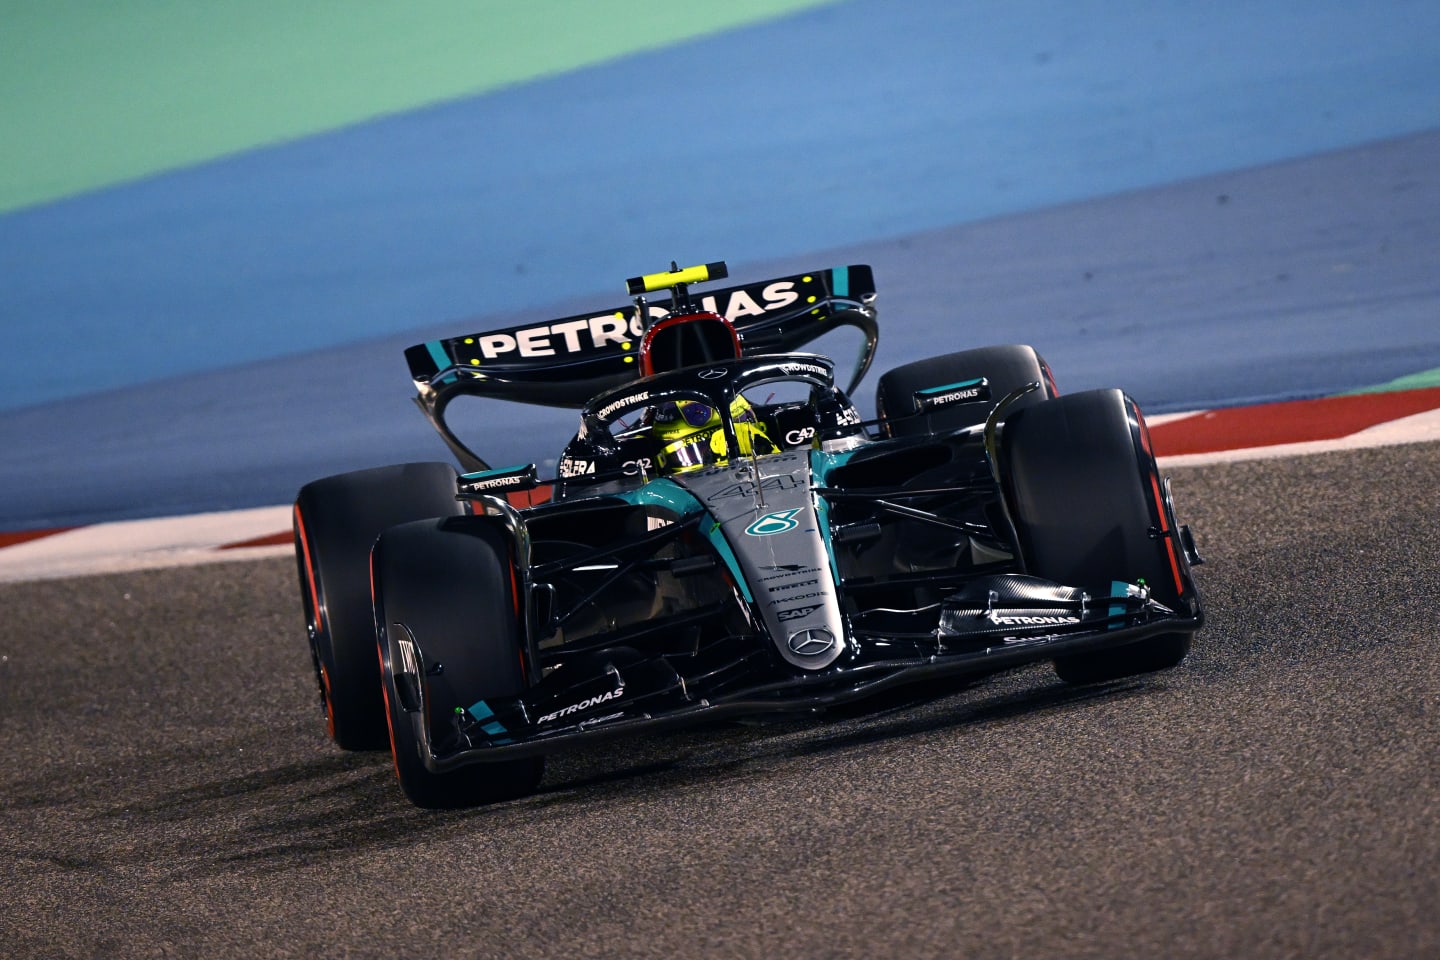 BAHRAIN, BAHRAIN - MARCH 01: Lewis Hamilton of Great Britain driving the (44) Mercedes AMG Petronas F1 Team W15 on track during qualifying ahead of the F1 Grand Prix of Bahrain at Bahrain International Circuit on March 01, 2024 in Bahrain, Bahrain. (Photo by Clive Mason/Getty Images)